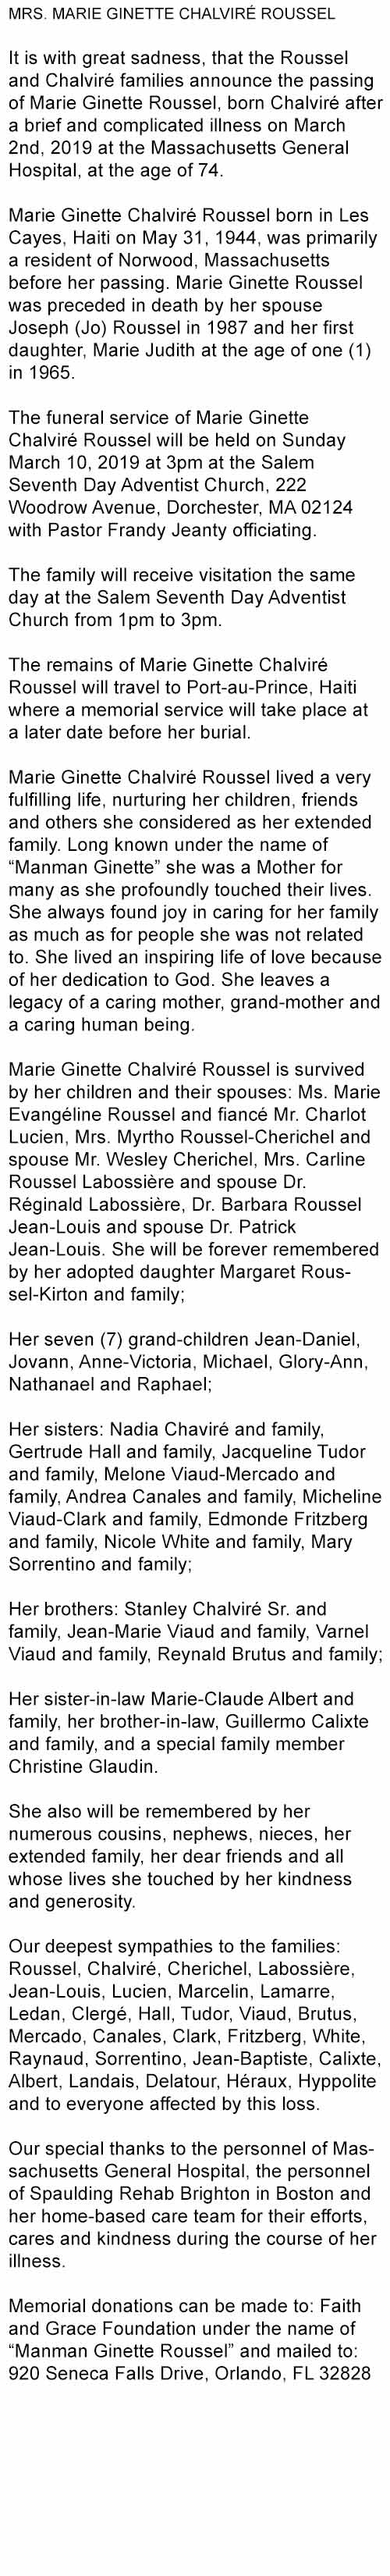 OBITUARY OF MRS. MARIE GINETTE CHALVIRÉ ROUSSEL